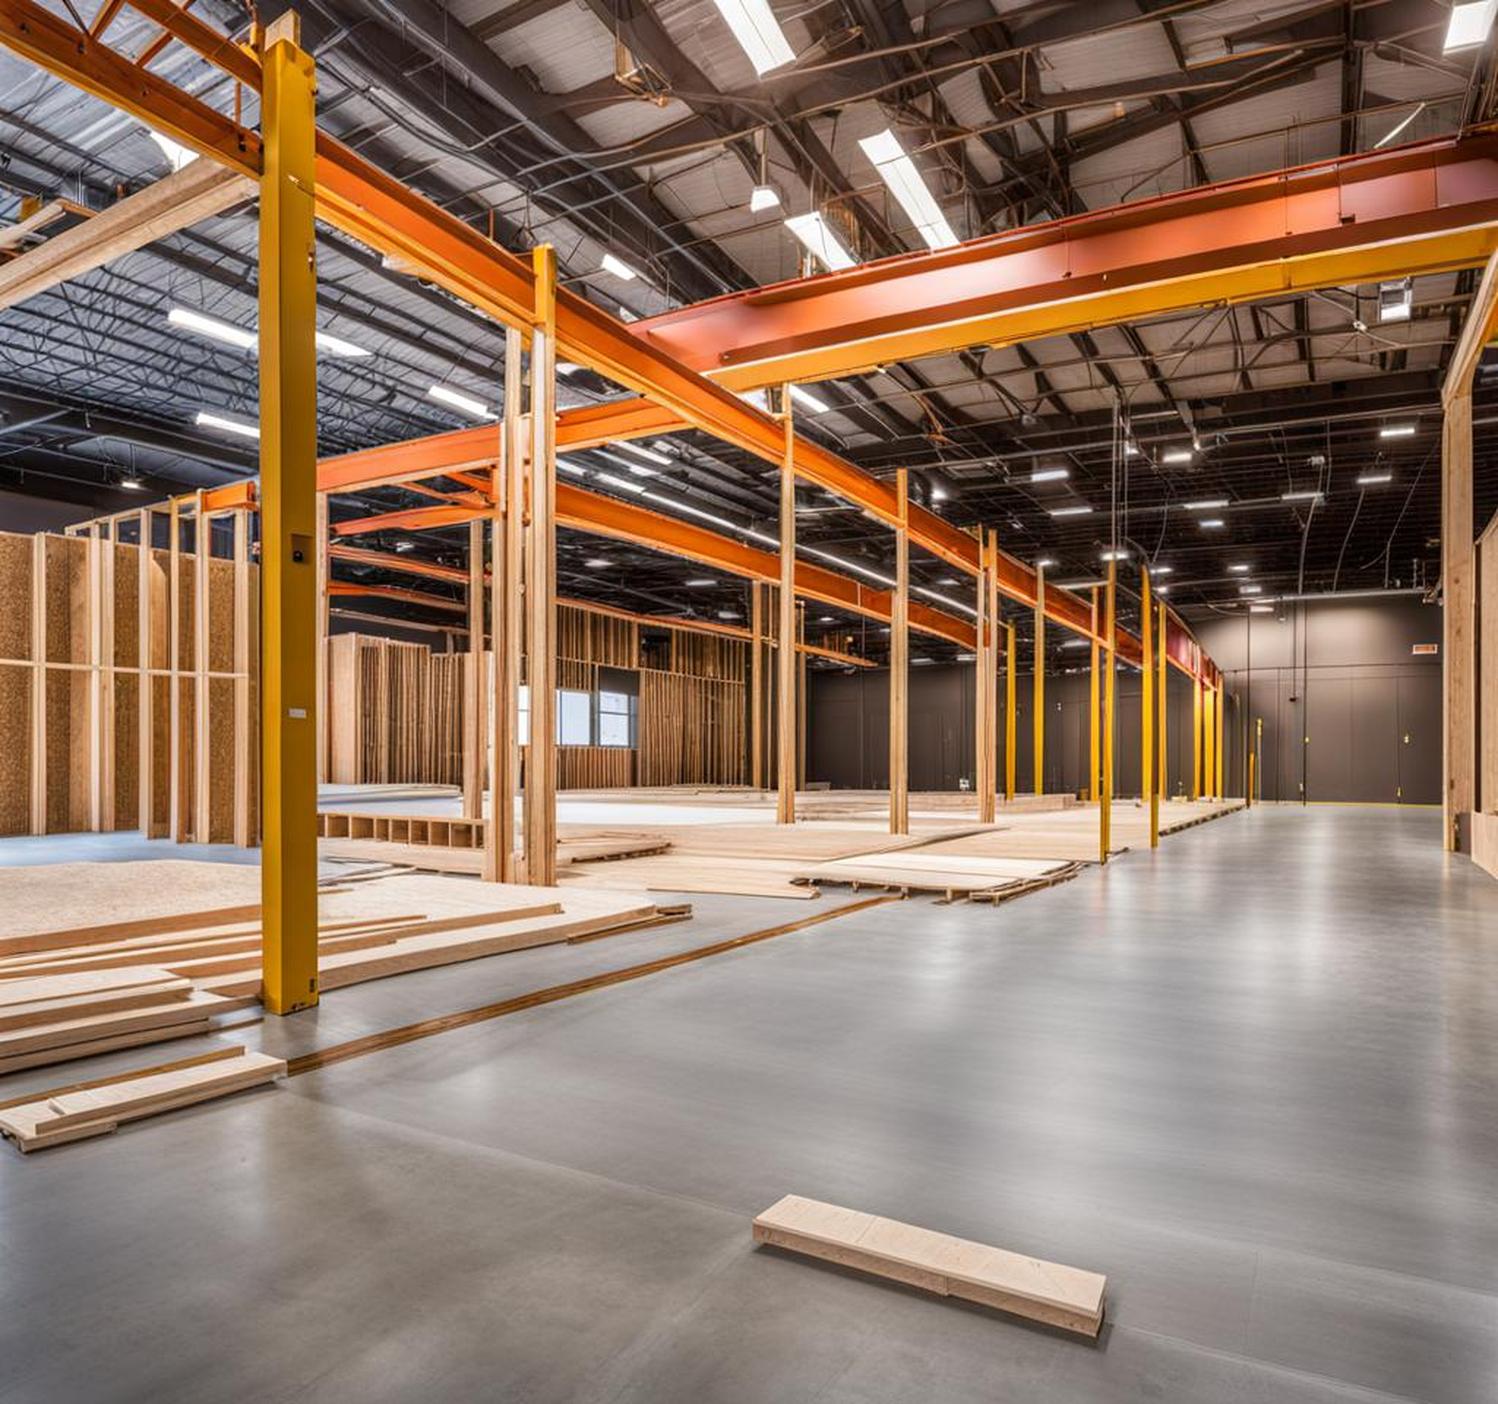 Floor & Decor Execs Don’t Want You Seeing These Kendall Store Construction Photos